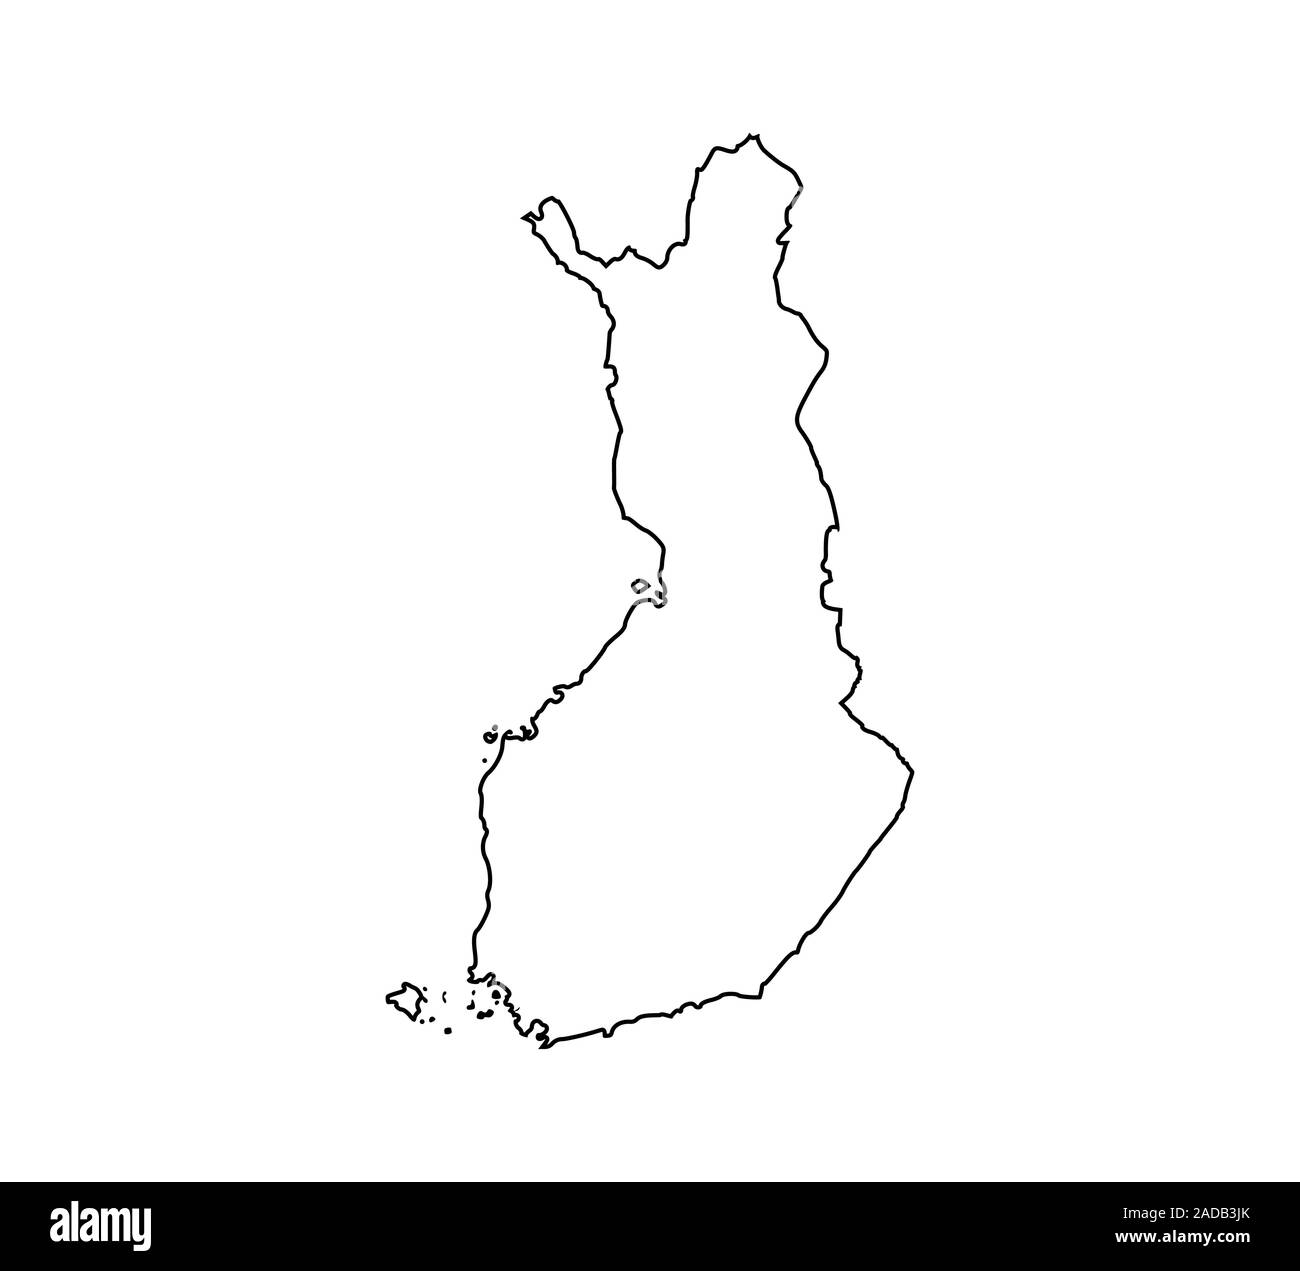 Finland map on white background. Vector illustration. Stock Vector